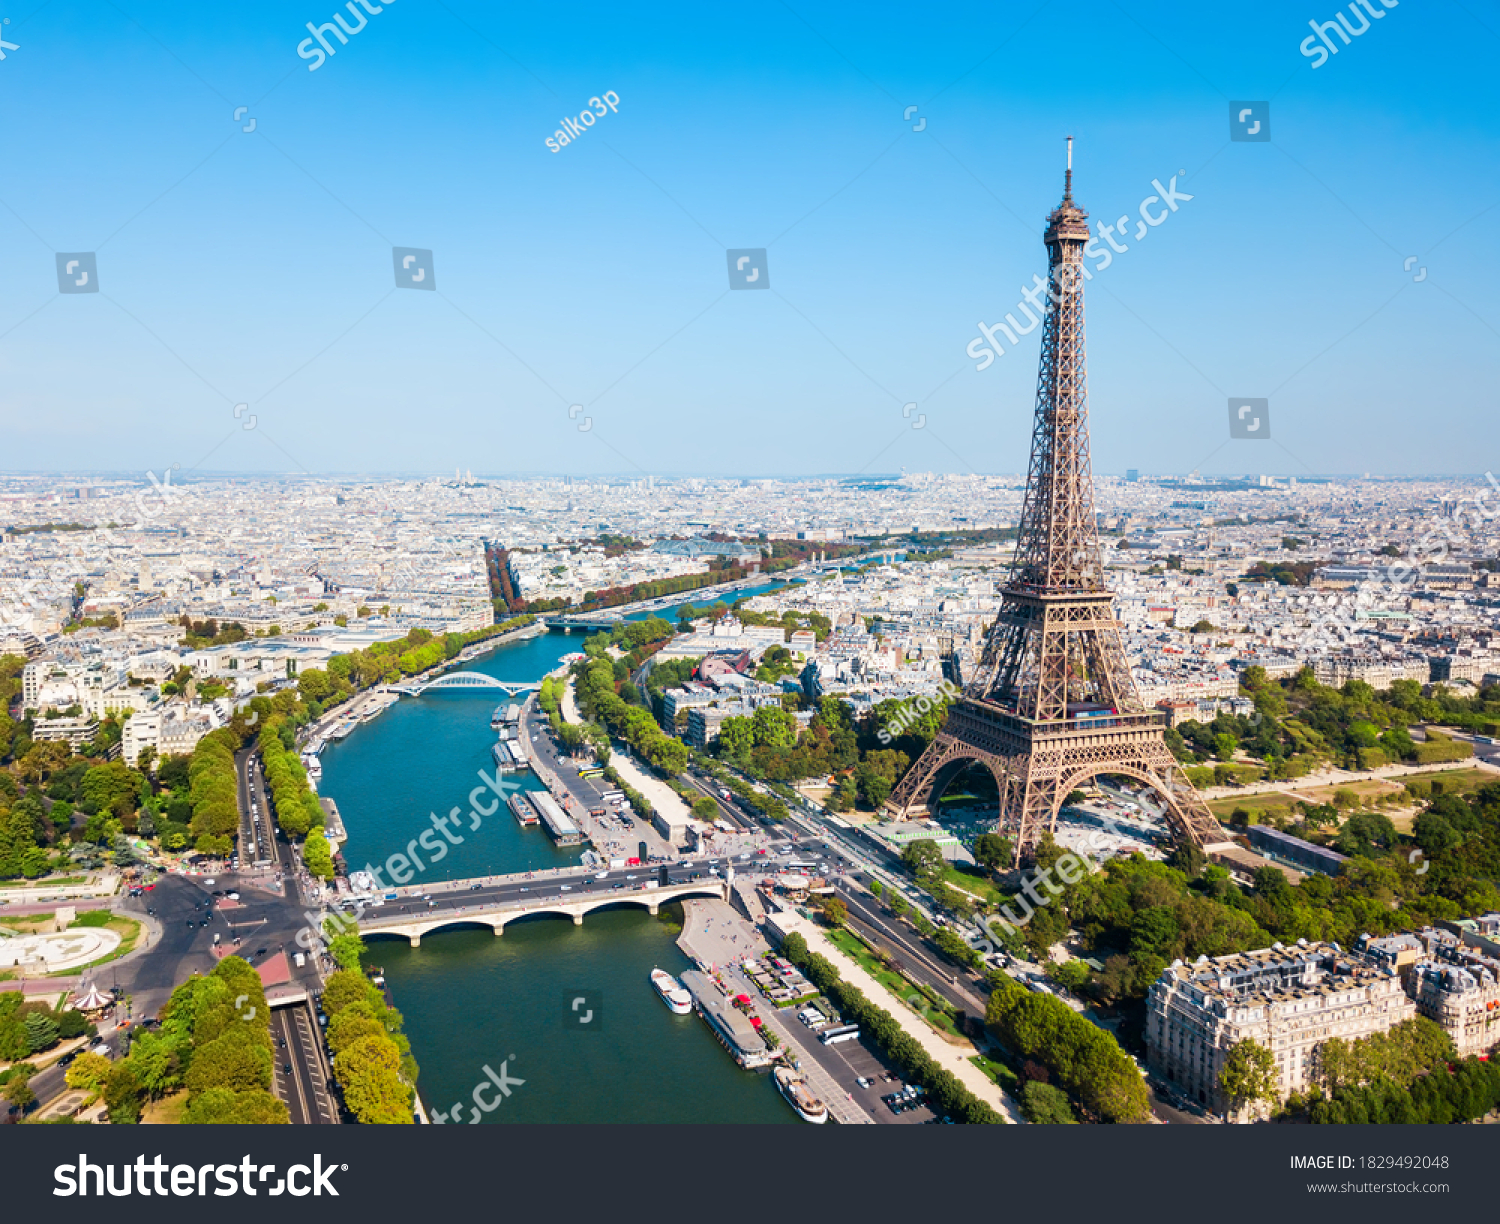 Eiffel Tower or Tour Eiffel aerial view, is a wrought iron lattice tower on the Champ de Mars in Paris, France #1829492048